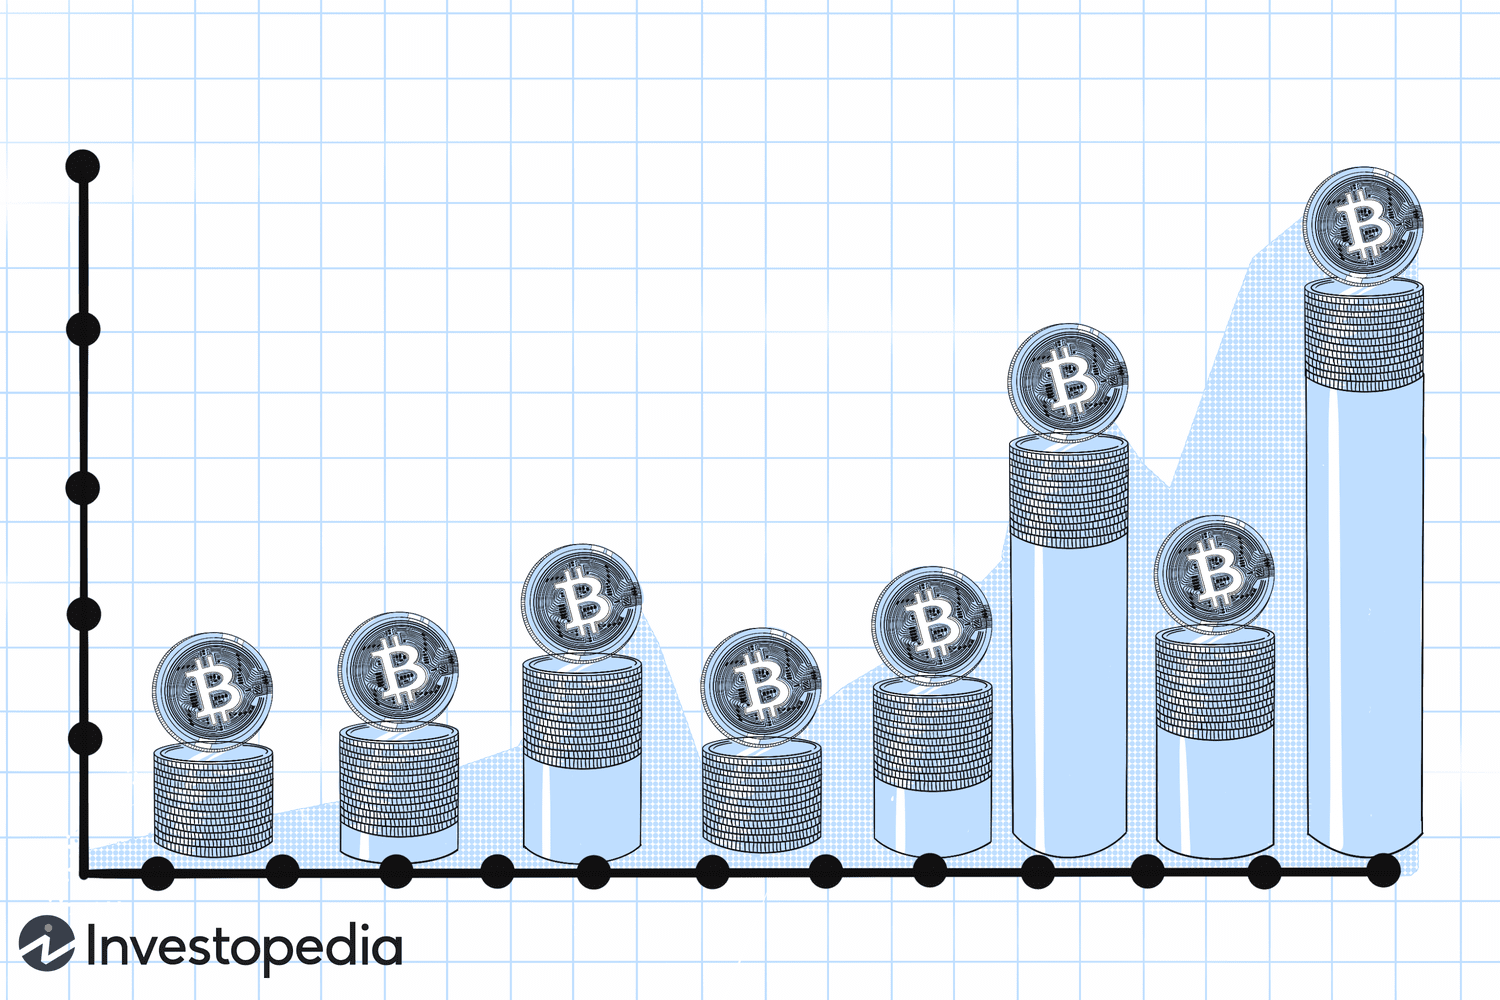 How to Value Bitcoin and Other Cryptocurrencies - Lyn Alden